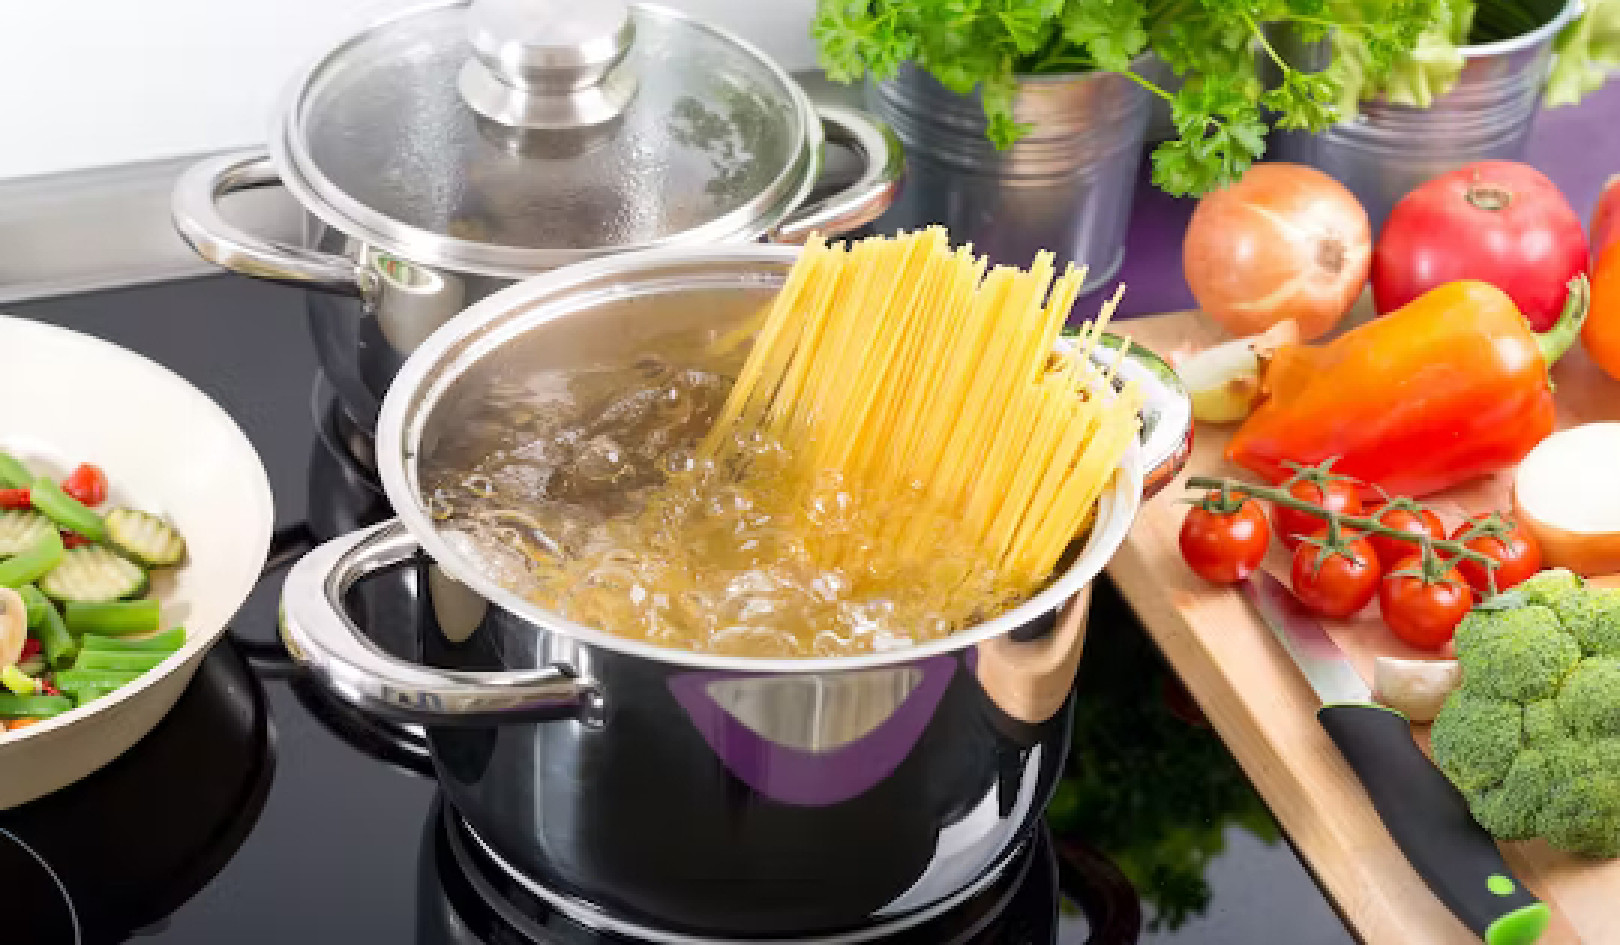 How to Cook Spaghetti Properly and Save Money